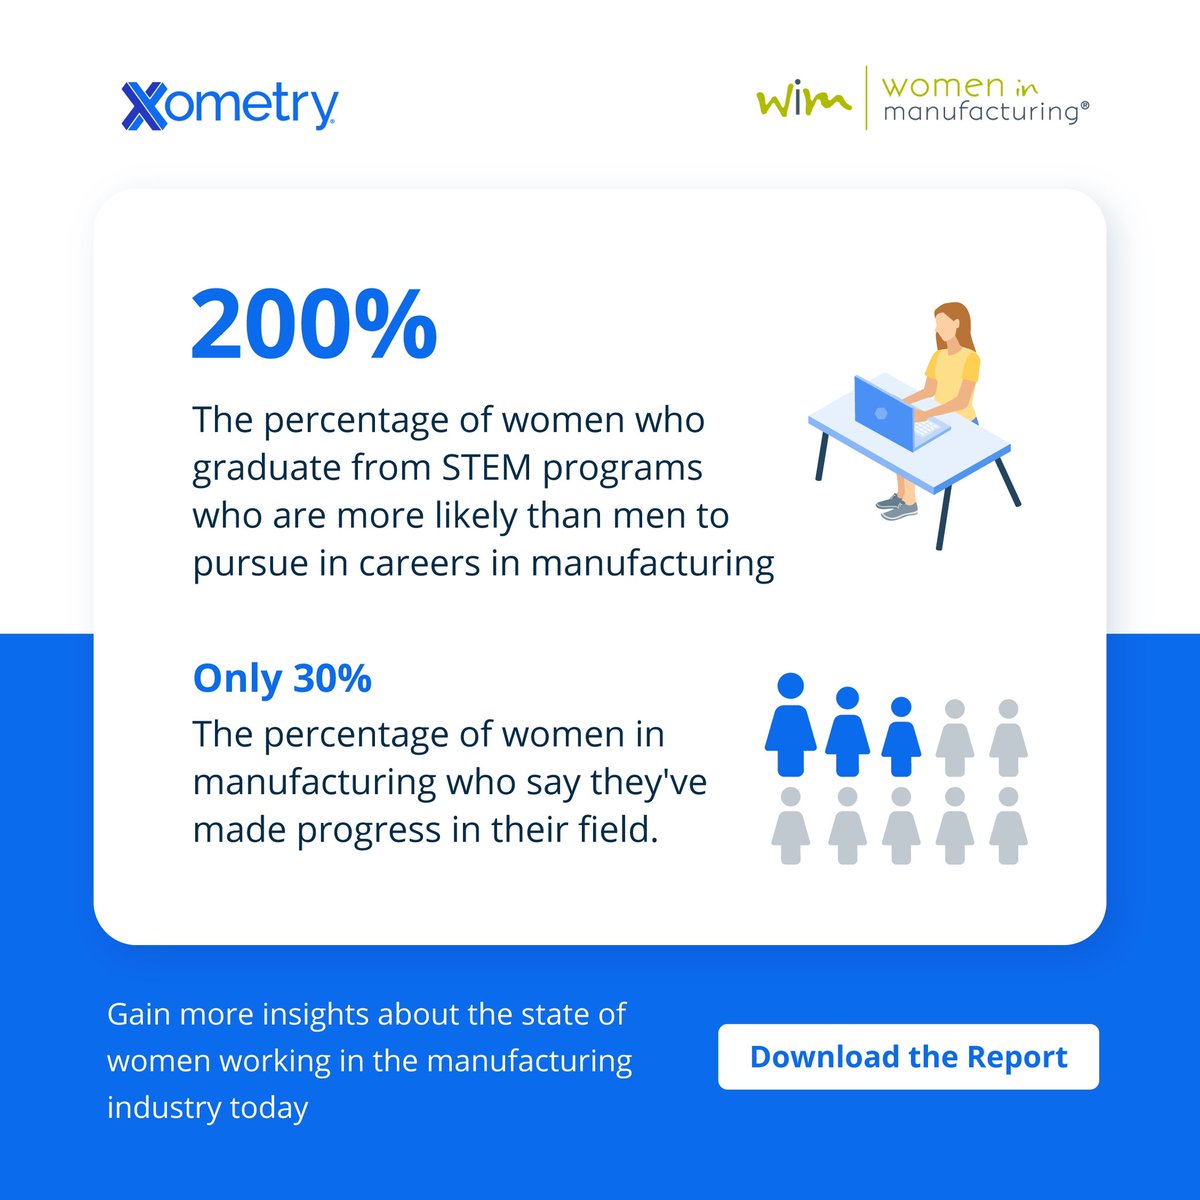 Our 3rd-annual study in partnership w/ @WomeninMFG shows that women who pursue #STEM educations are more than 2x likely to pursue a #manufacturing #career. But once in the industry, less than 1/3rd feel they've made progress in their field. 

(1/2)